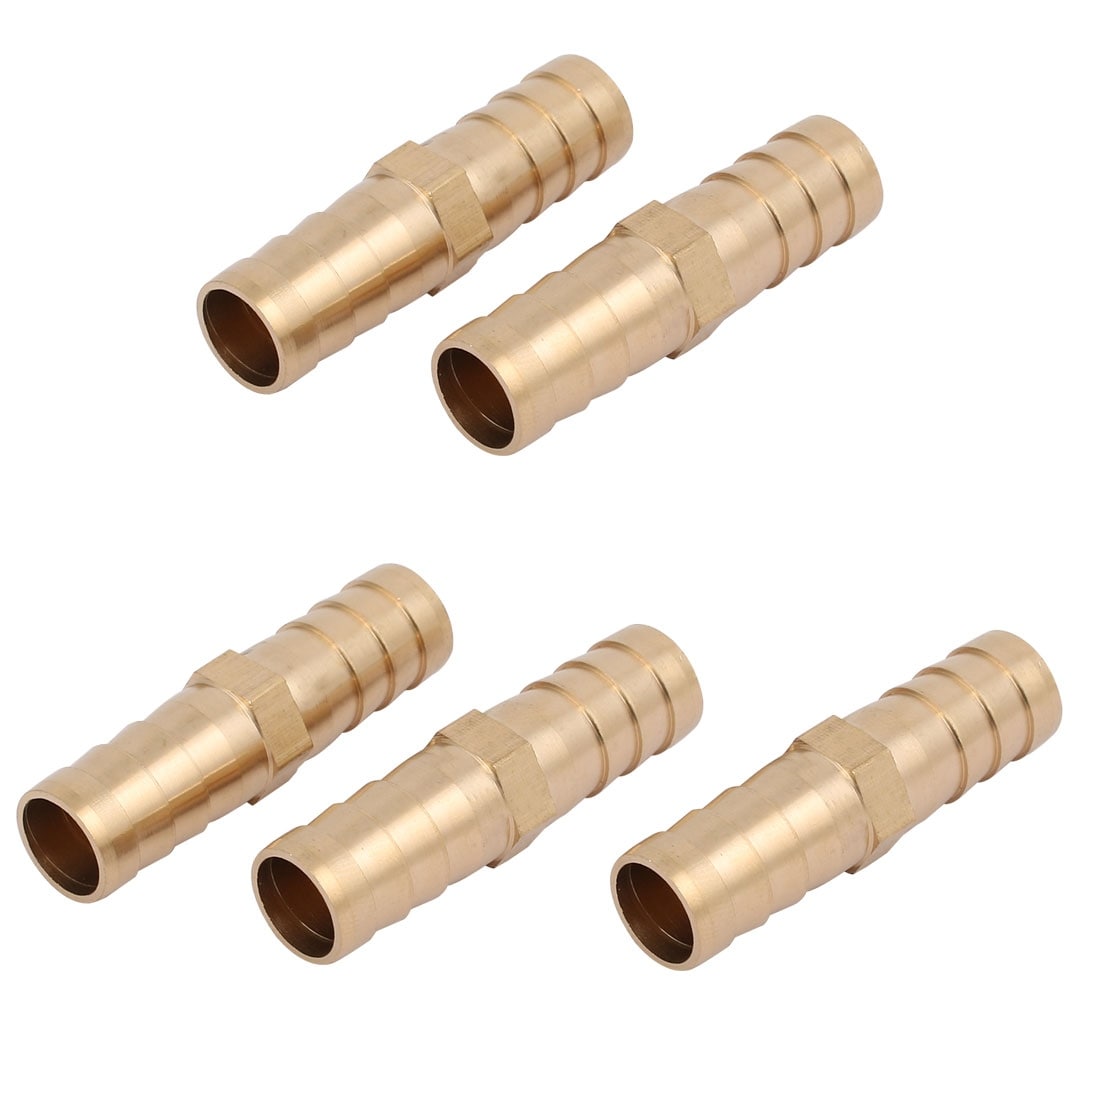 12mm Dia Copper Straight Hose Barb Fittings Pipe Tube Connectors 5pcs -  Brass Tone - Bed Bath & Beyond - 35808623